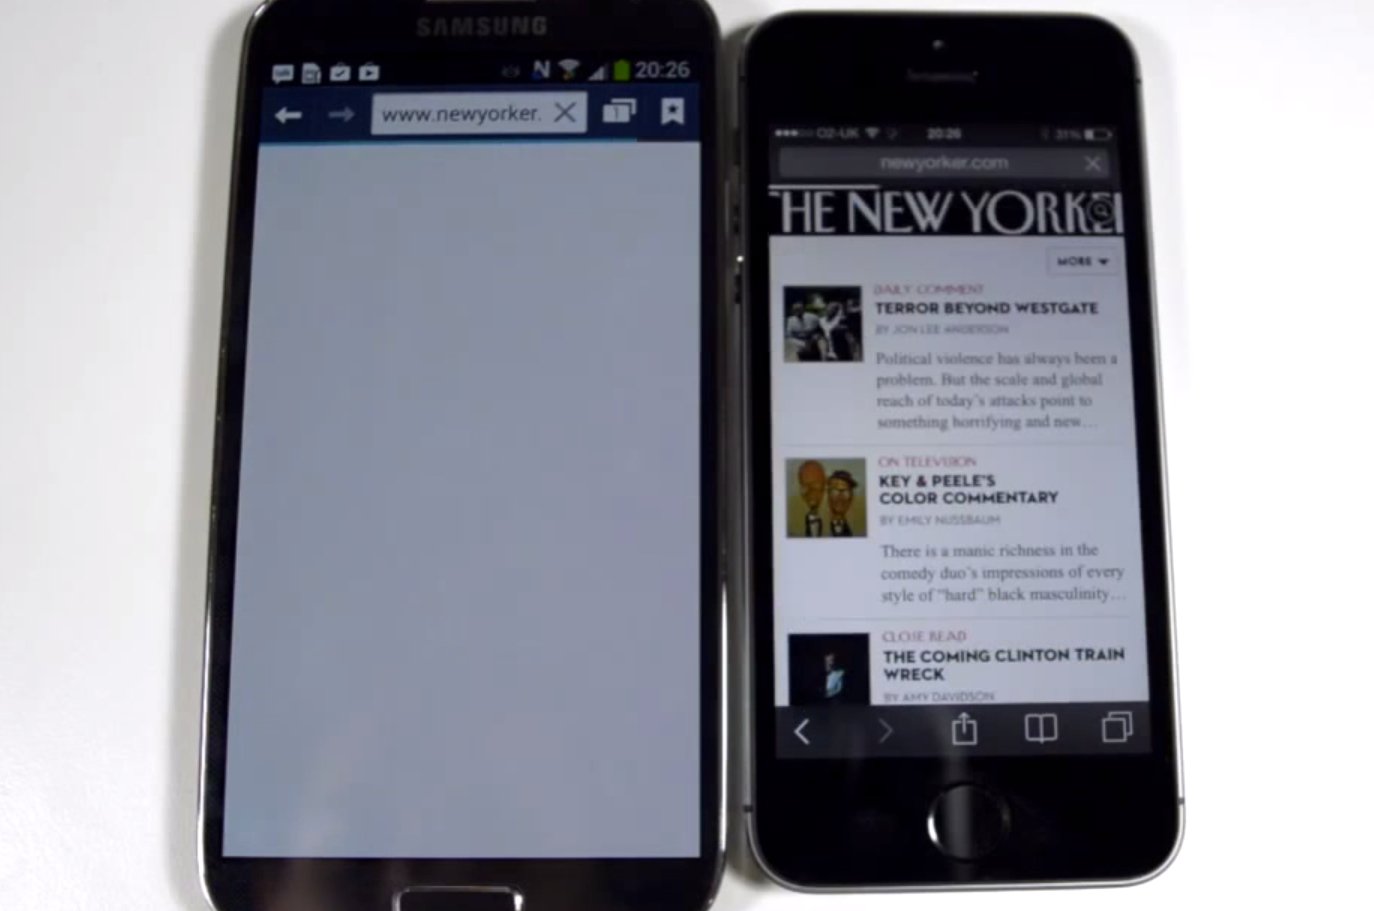 Browser Speed-Test iPhone 5s vs. Samsung Galaxy S4 6